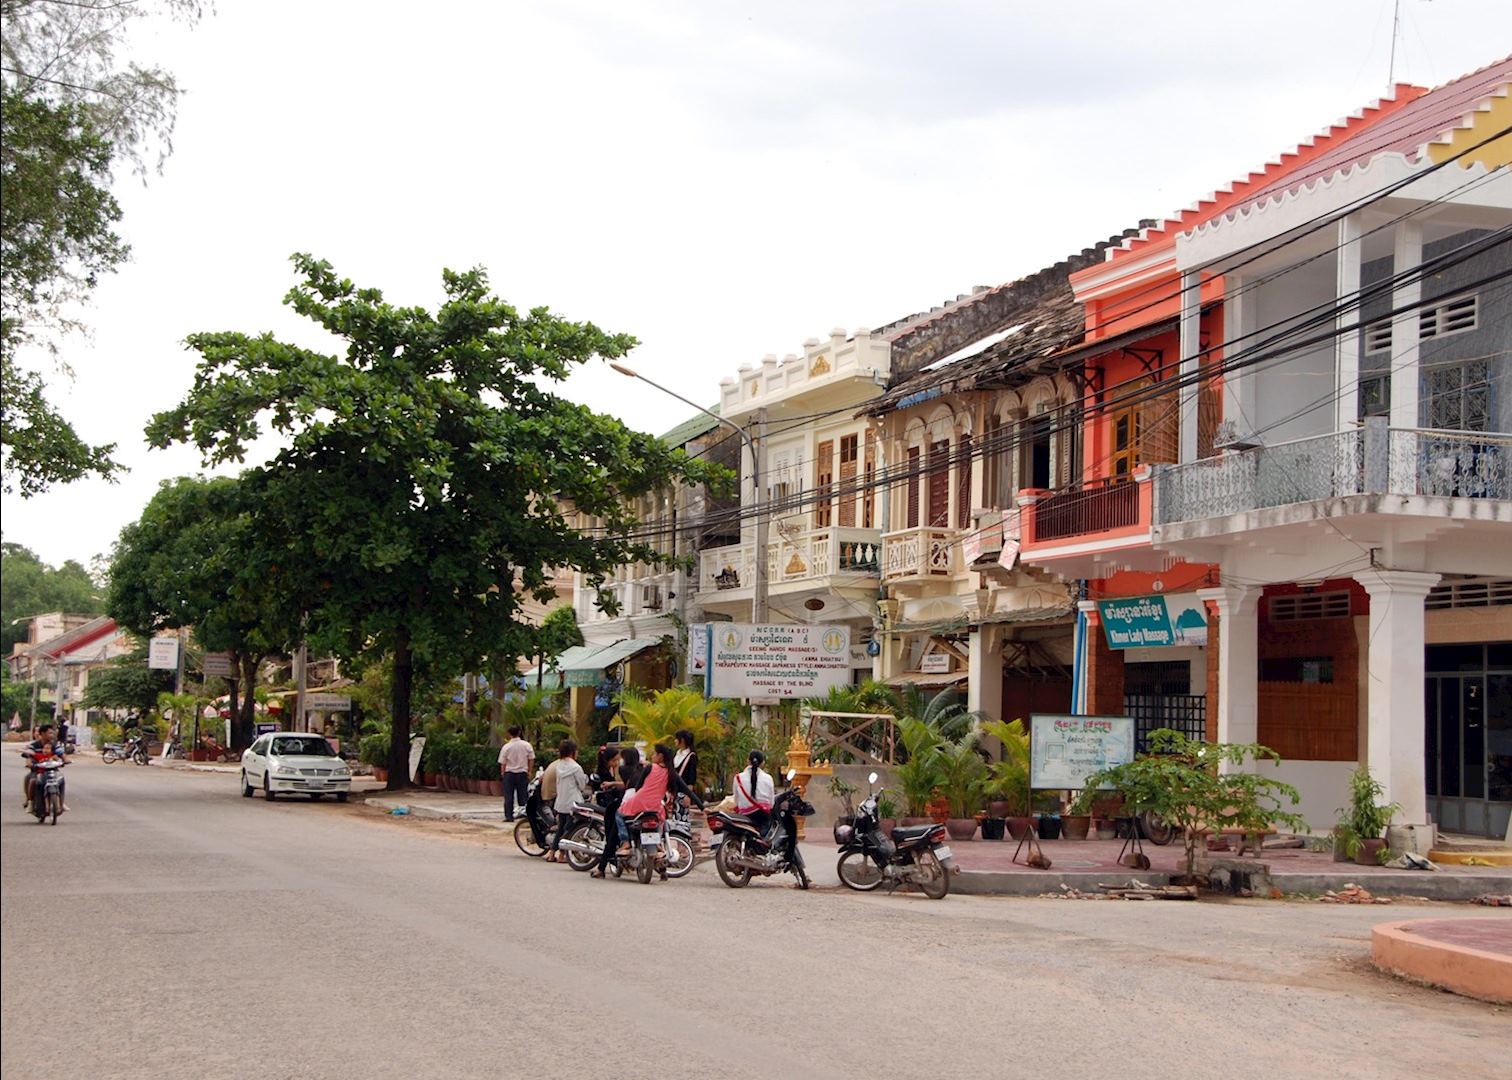 Visit Kampot on a trip to Cambodia | Audley Travel
